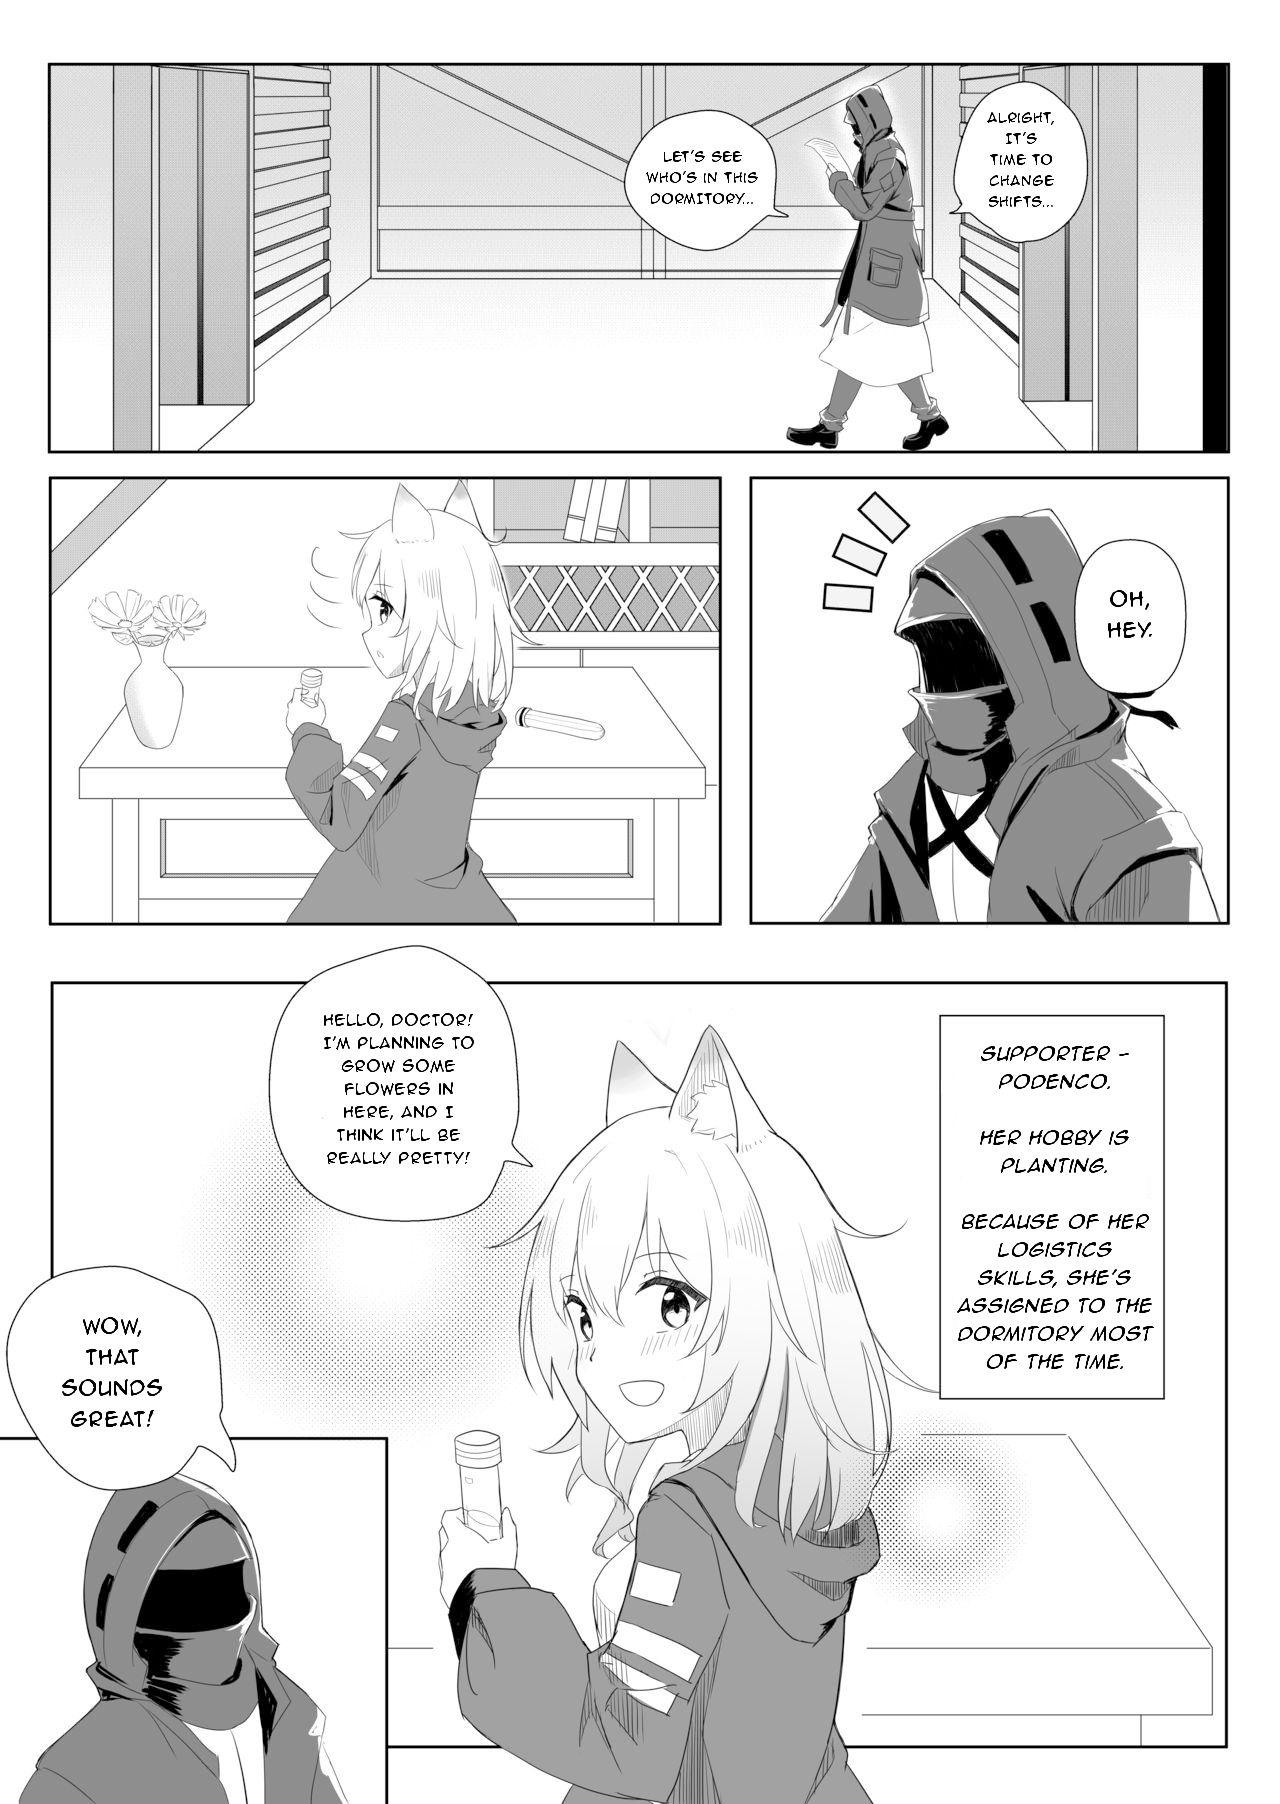 Polish Podenco in heat - Arknights Curious - Page 2